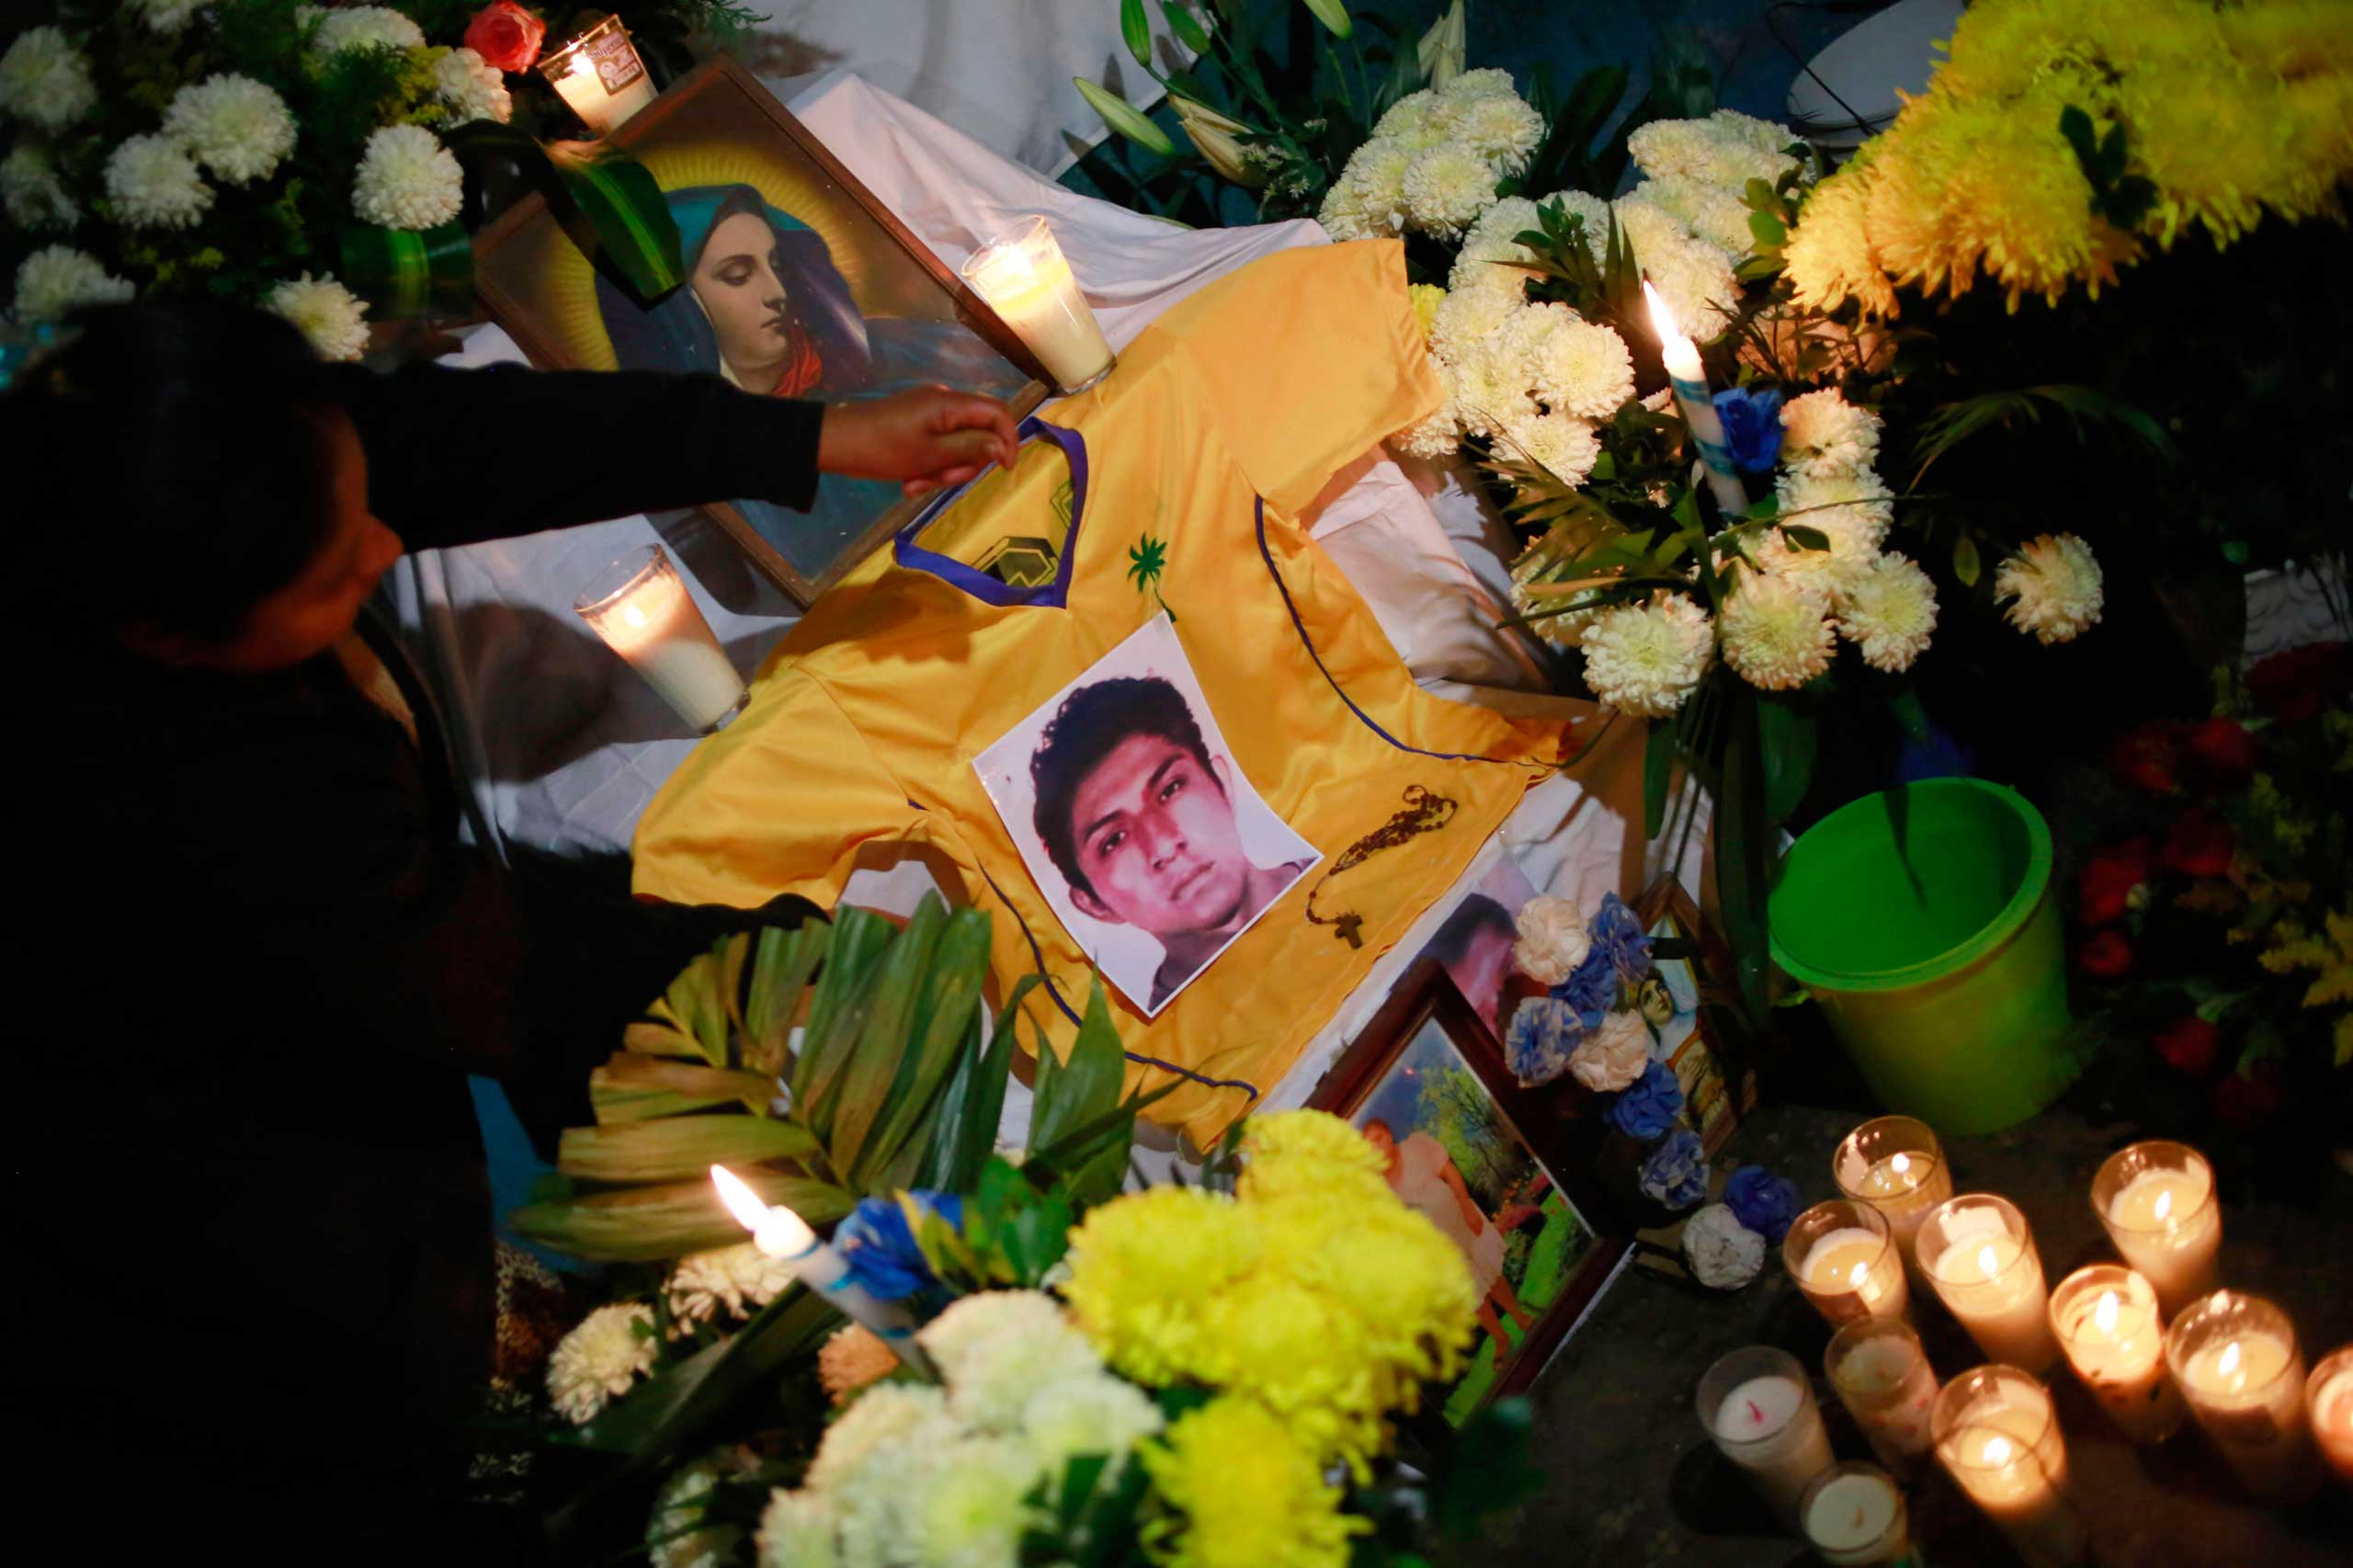 A photo of Alexander Mora Venancio is seen at an altar in the house of his father in El Pericon, in the southern Mexican state of Guerrero, Dec. 6, 2014. (Jorge Lopez—Reuters)